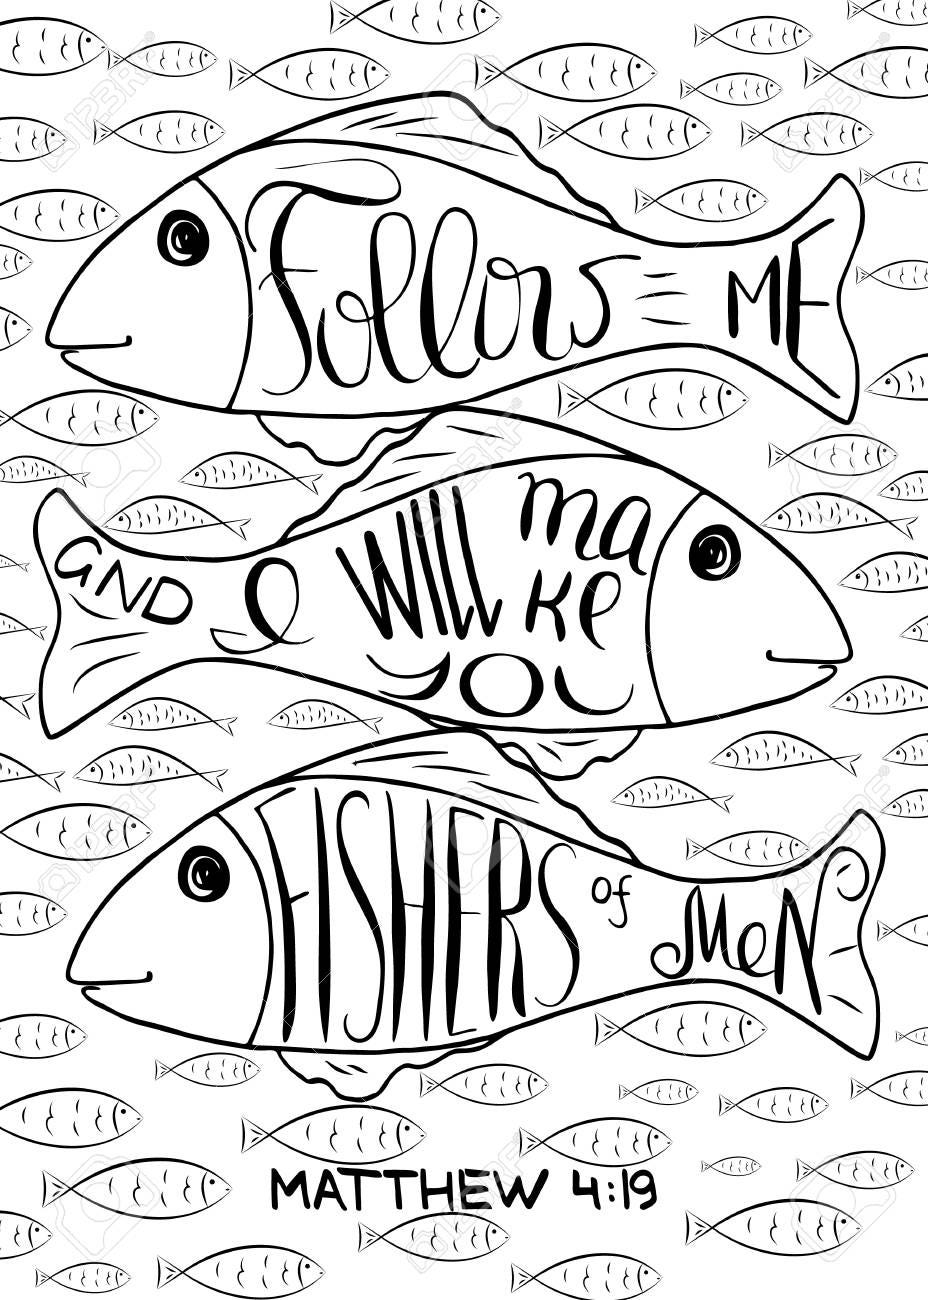 Three large fish outlines sit in the foreground with many smaller fish behind. The larger fish contain the text, "Follow me and I will make you fishers of men" from the Gospel of Matthew.